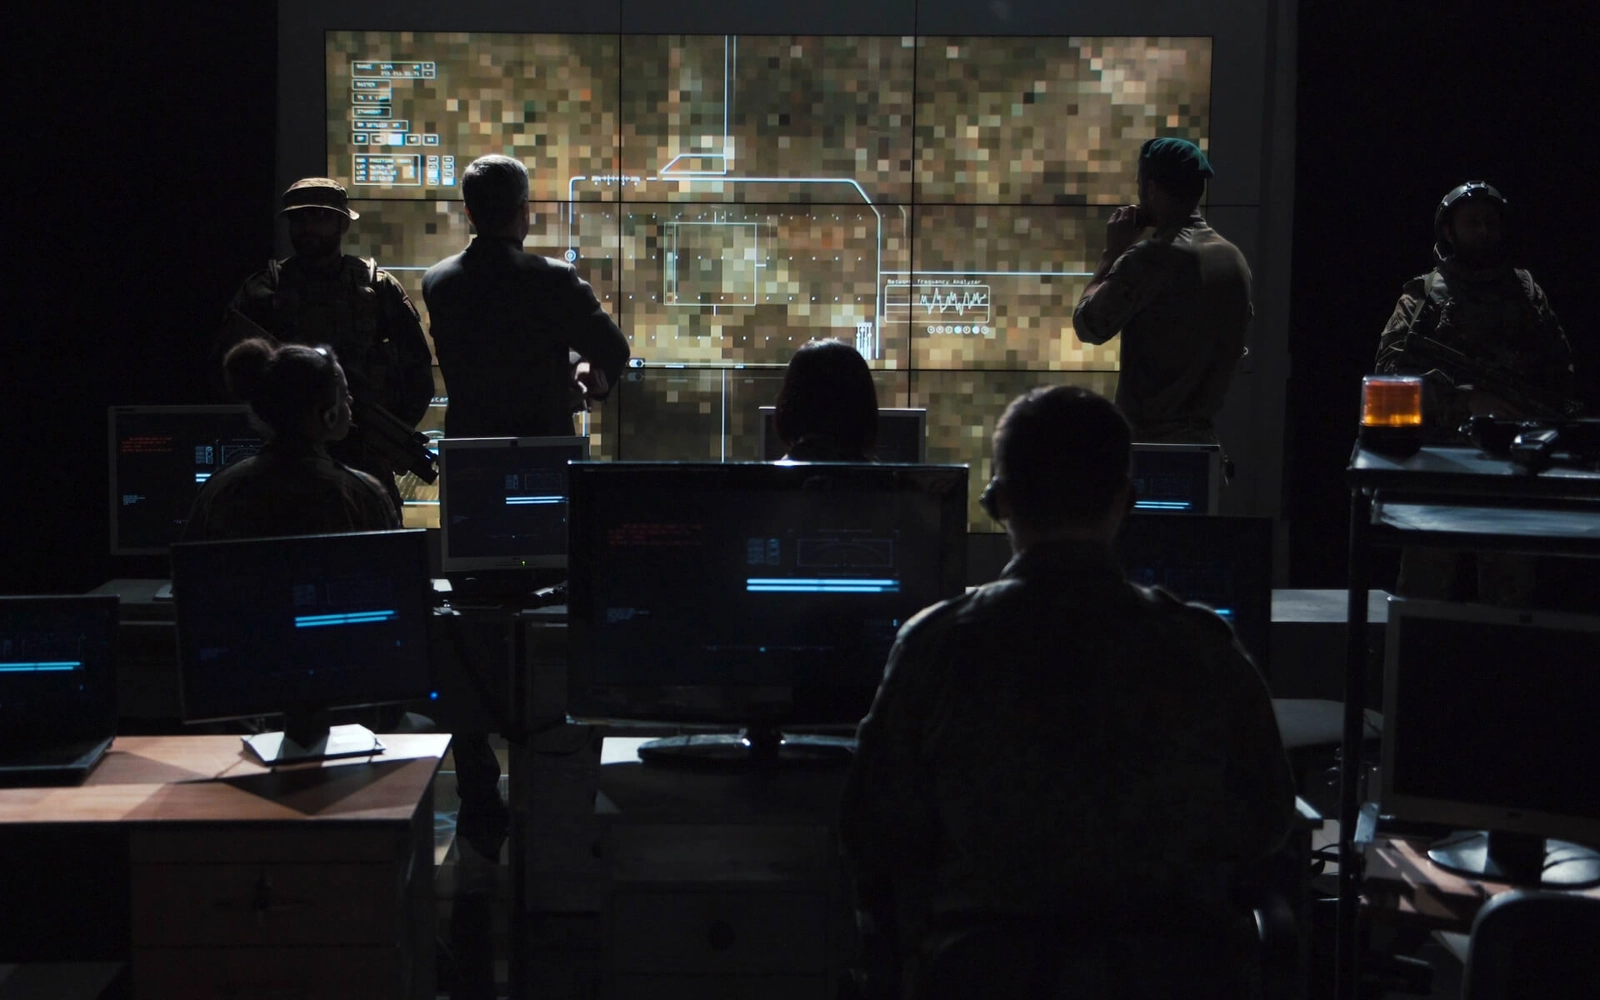 Image of military team discussion in a room